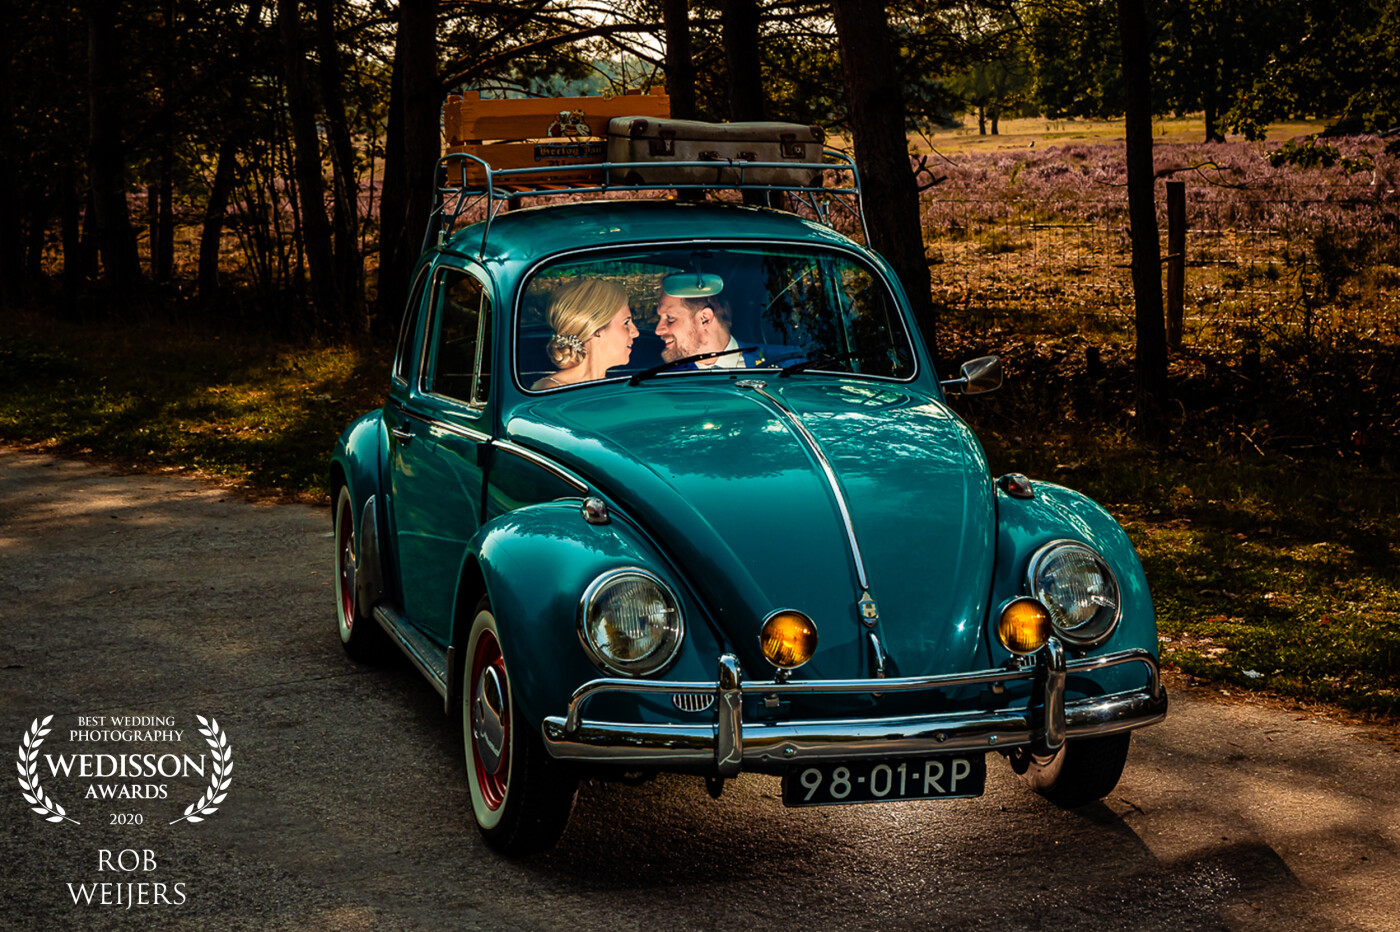 On the wedding day of Sjraar and Ellen, we went to the heather for the photoshoot. They had an amazing car that day, that I wanted to give a special place in the reportage. With the help of 3 speed lights and a great assistant, I made this shot.